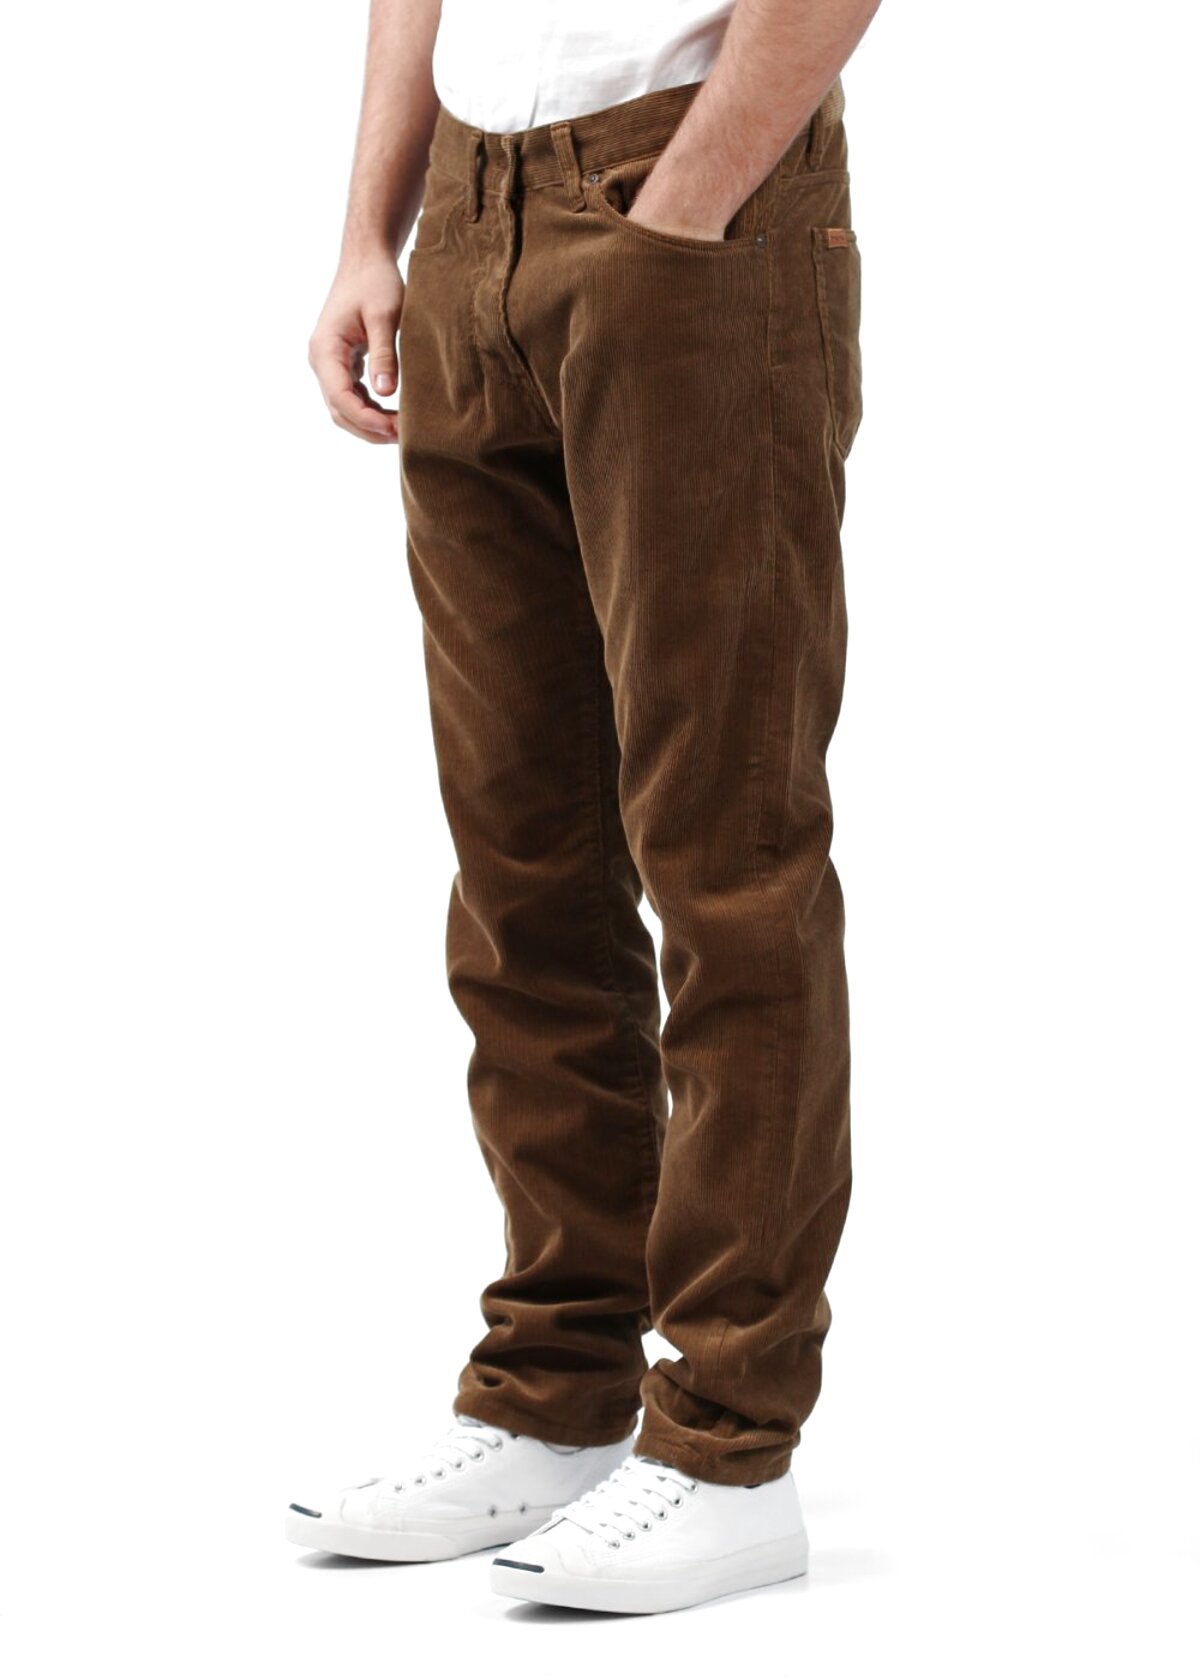 Carhartt Cords for sale in UK | 47 used Carhartt Cords